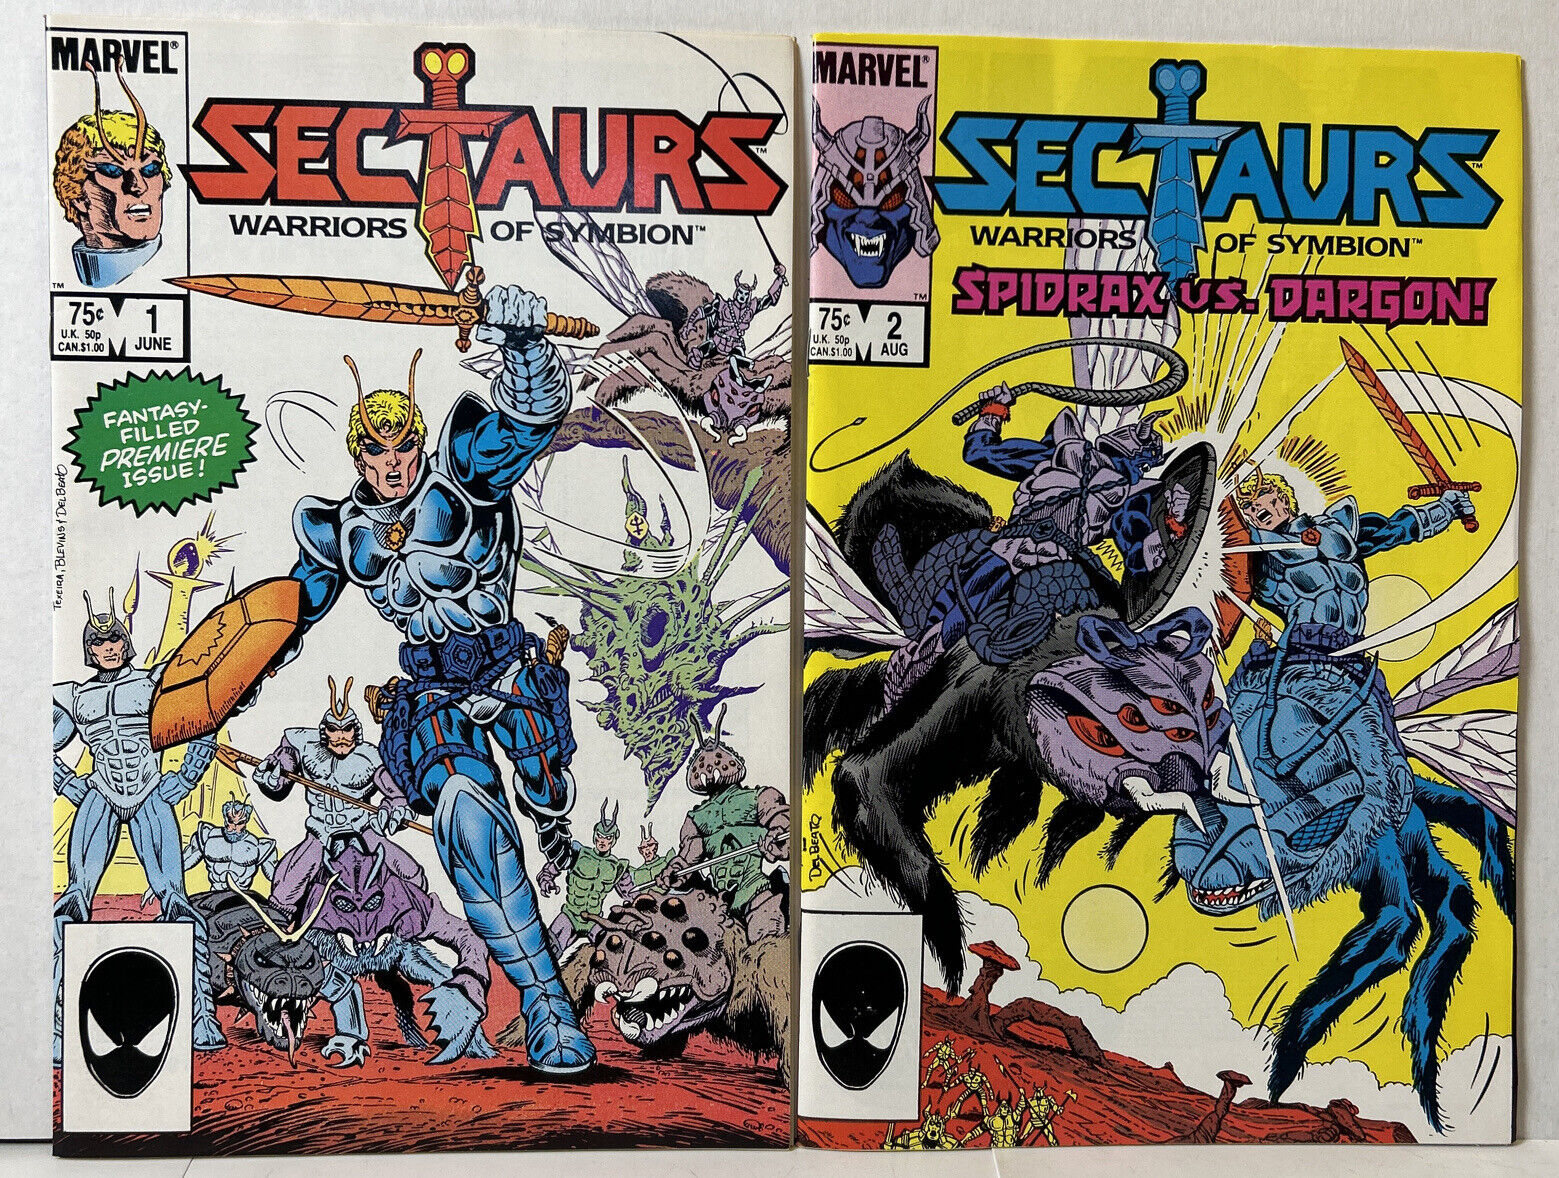 Sectaurs Warriors of Symbion #1-2 (Marvel 1985) *VF+* New Bags & Boards